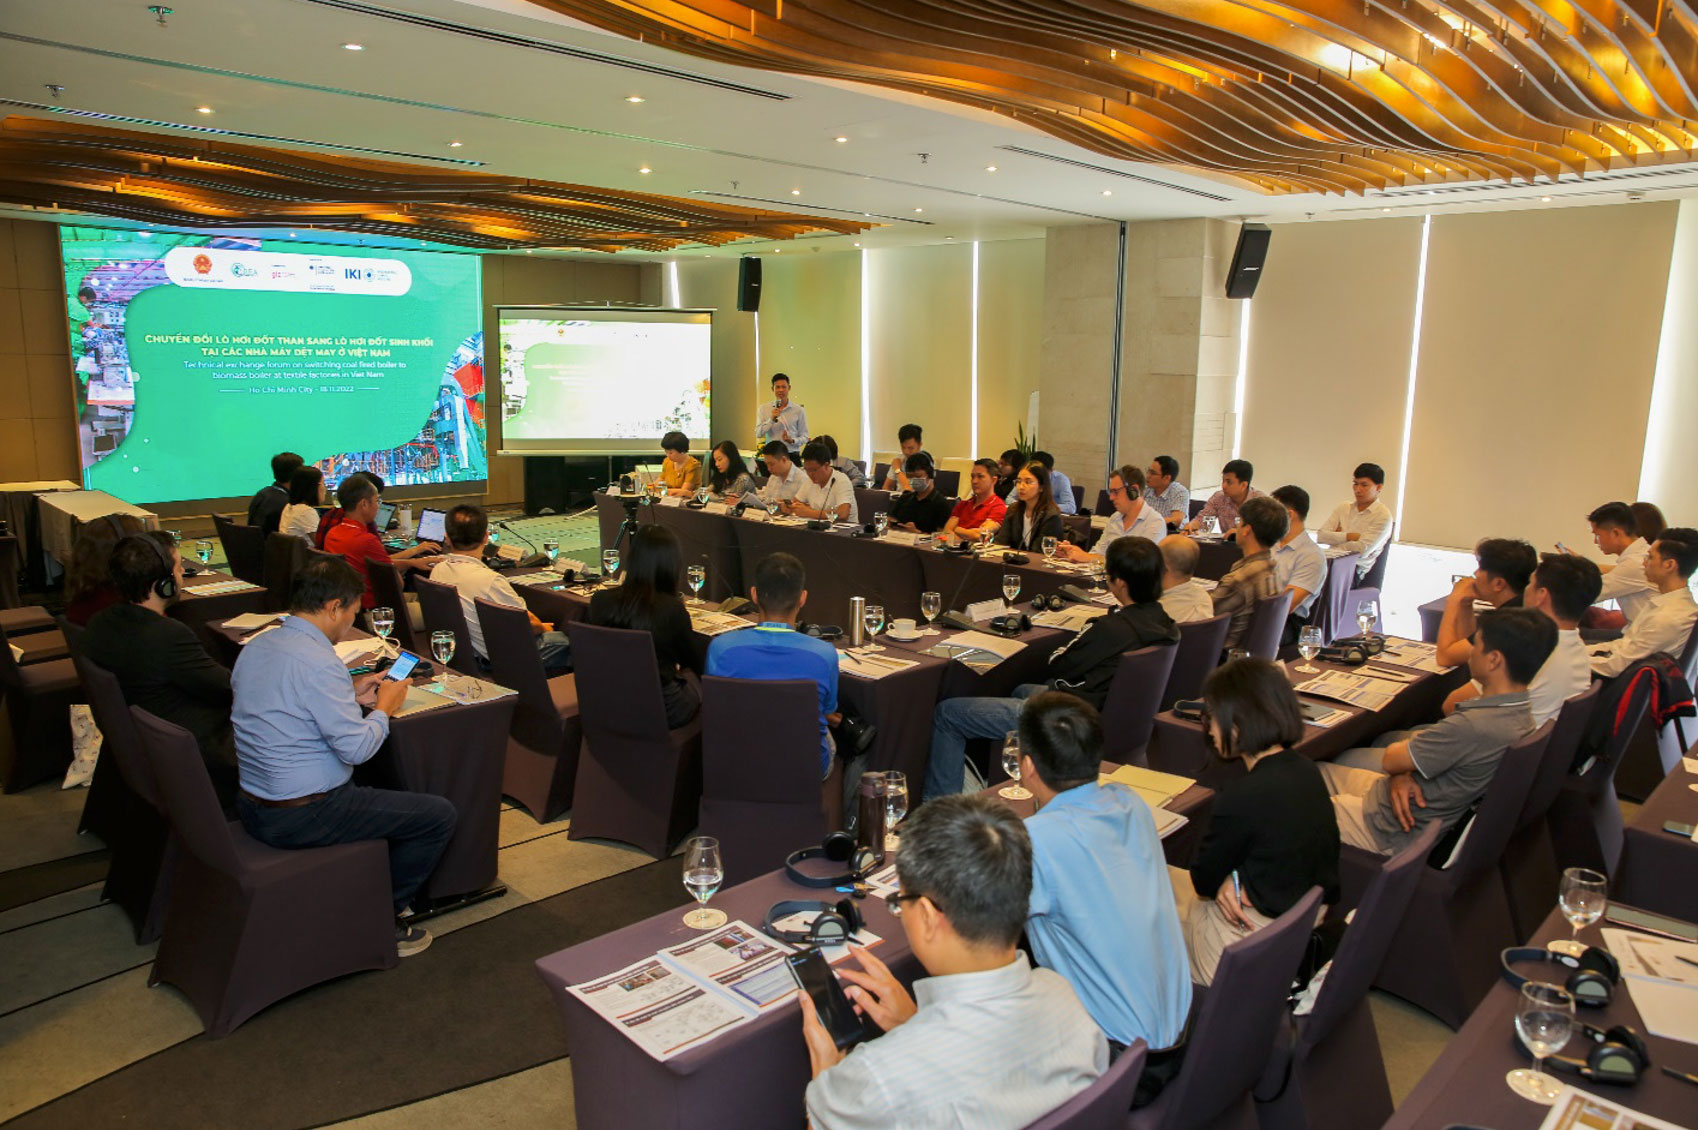 Technical exchange forum on switching coal-fired to biomass boilers at textile factories in Viet Nam [ESP/GIZ Viet Nam]